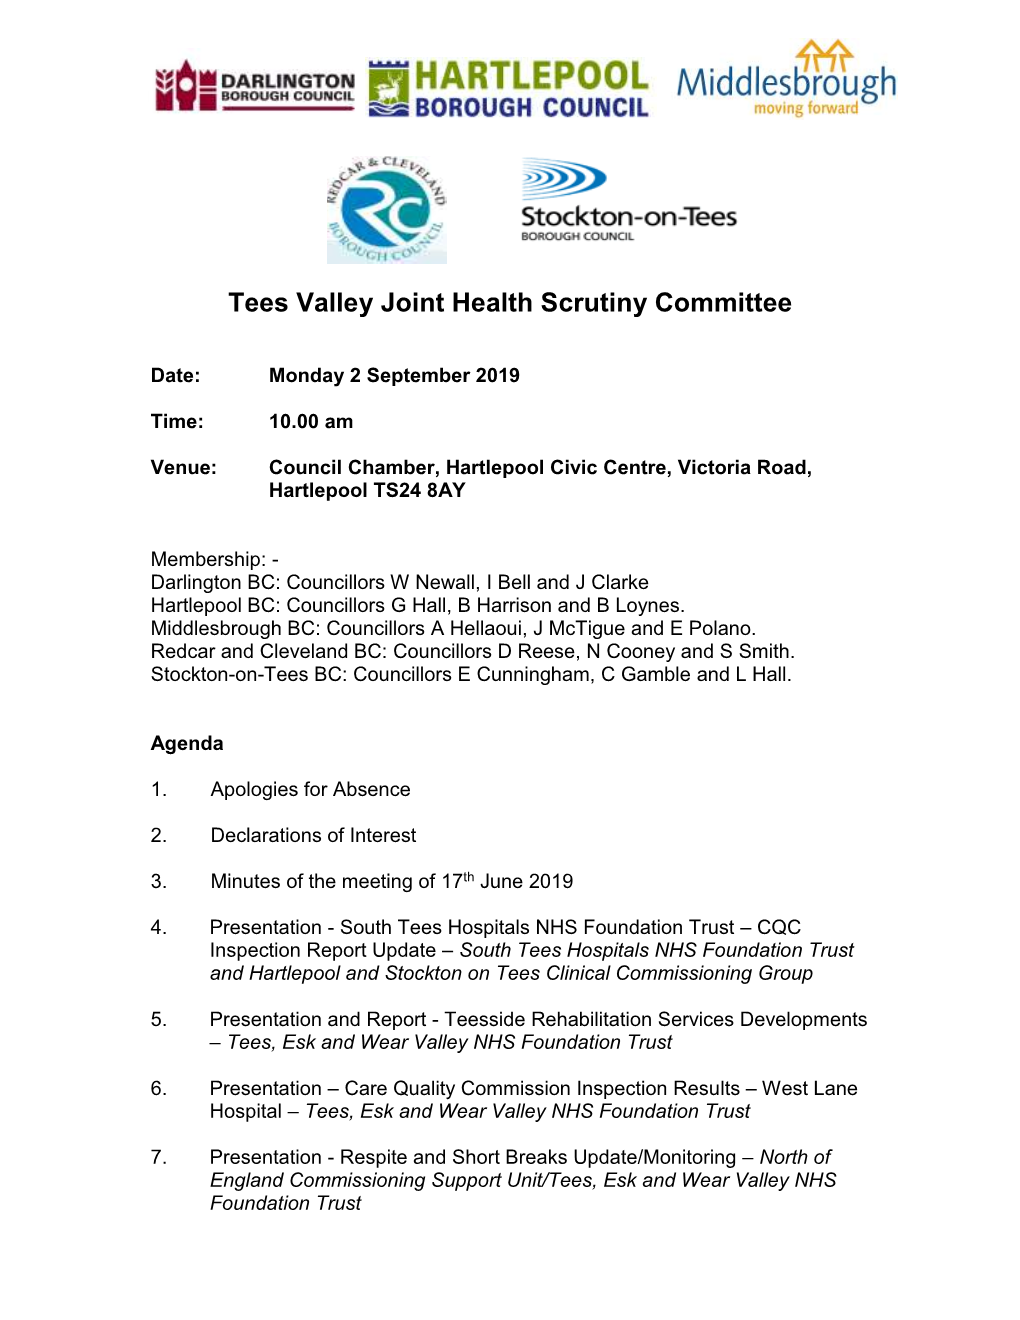 Tees Valley Joint Health Scrutiny Committee